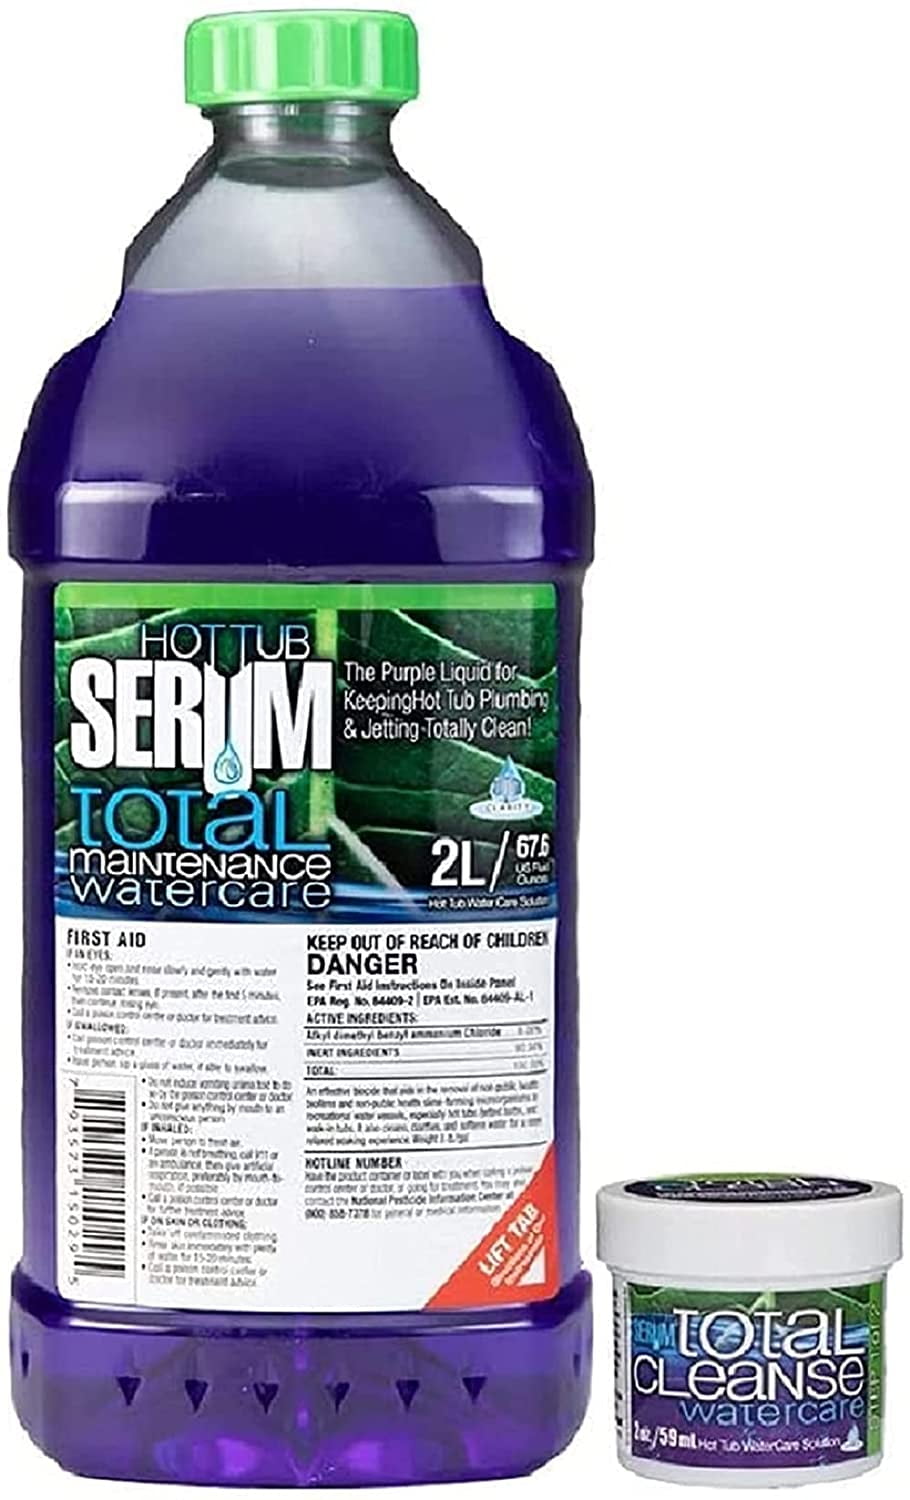 Post Shetland Dicht Hot Tub Serum - Total Maintenance (2 Ltr. Liquid) with Total Cleanse Jetted Hot  Tub, Spa & Jacuzzi Cleaner/Pool Conditioner Water Care Combo Kit (2 oz.  Gel) - Walmart.com